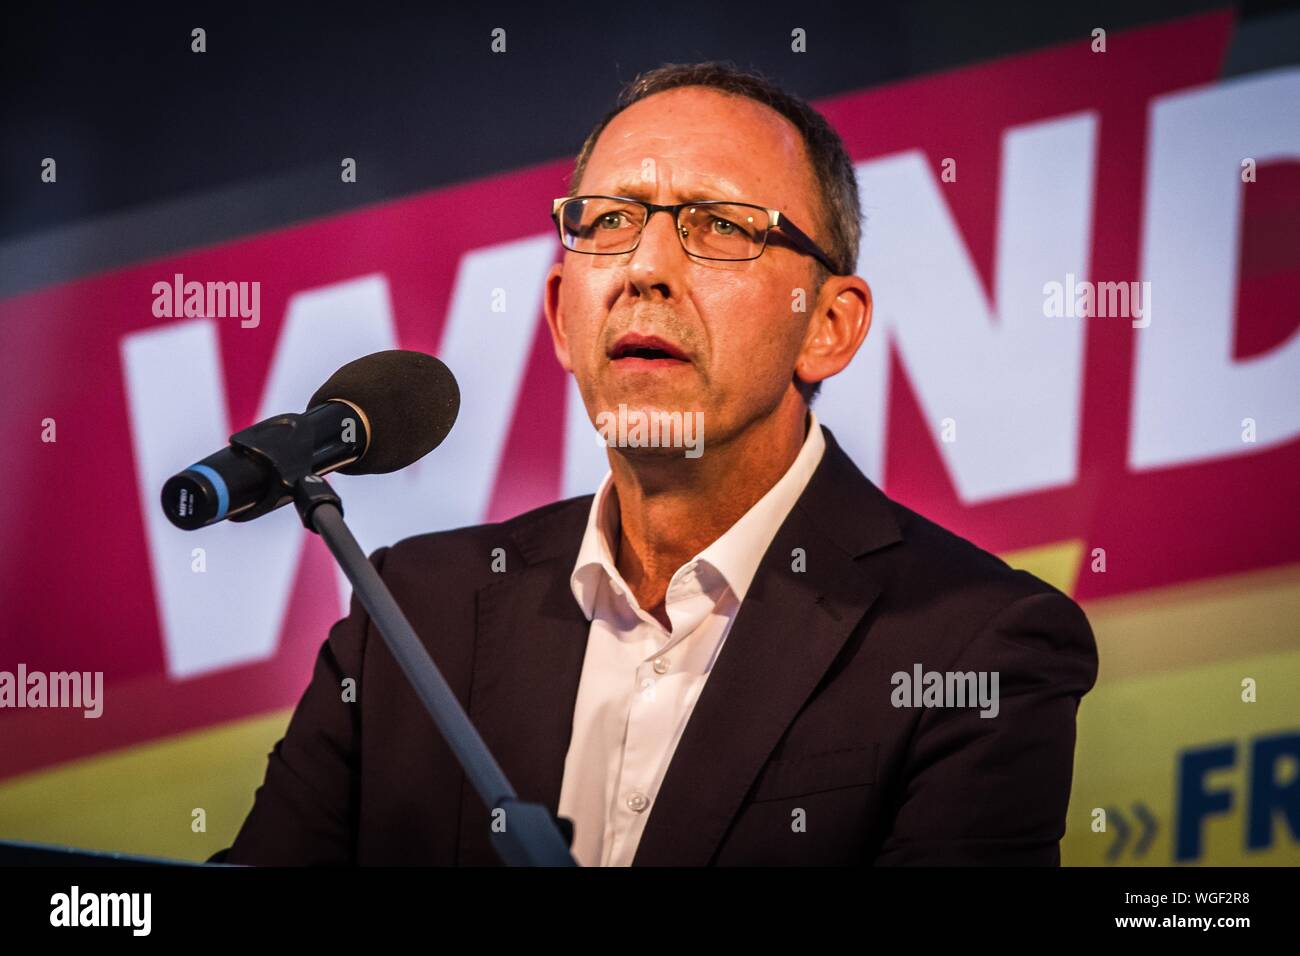 Koenigs Wusterhausen, Brandenburg, Germany. 30th Aug, 2019. JOERG URBAN of the AfD in Saxony. Aiming to be the strongest party in the eastern state of Brandenburg, Germany, the AfD held a Wahlparty (election party) at Koenigs Wusterhausen. In attendance were figures such as Andreas Kalbitz, who was recently outed with connections to right-extremist circles, Bjoern Hoecke, the embattled grounder of the AfD in Thueringen, and Joerg Urban, an extreme-rightist of the AfD in Saxony. Joerg Meuthen of the AfD in the European Parliament did not appear, despite being announced. (Credit Image: © Sach Stock Photo